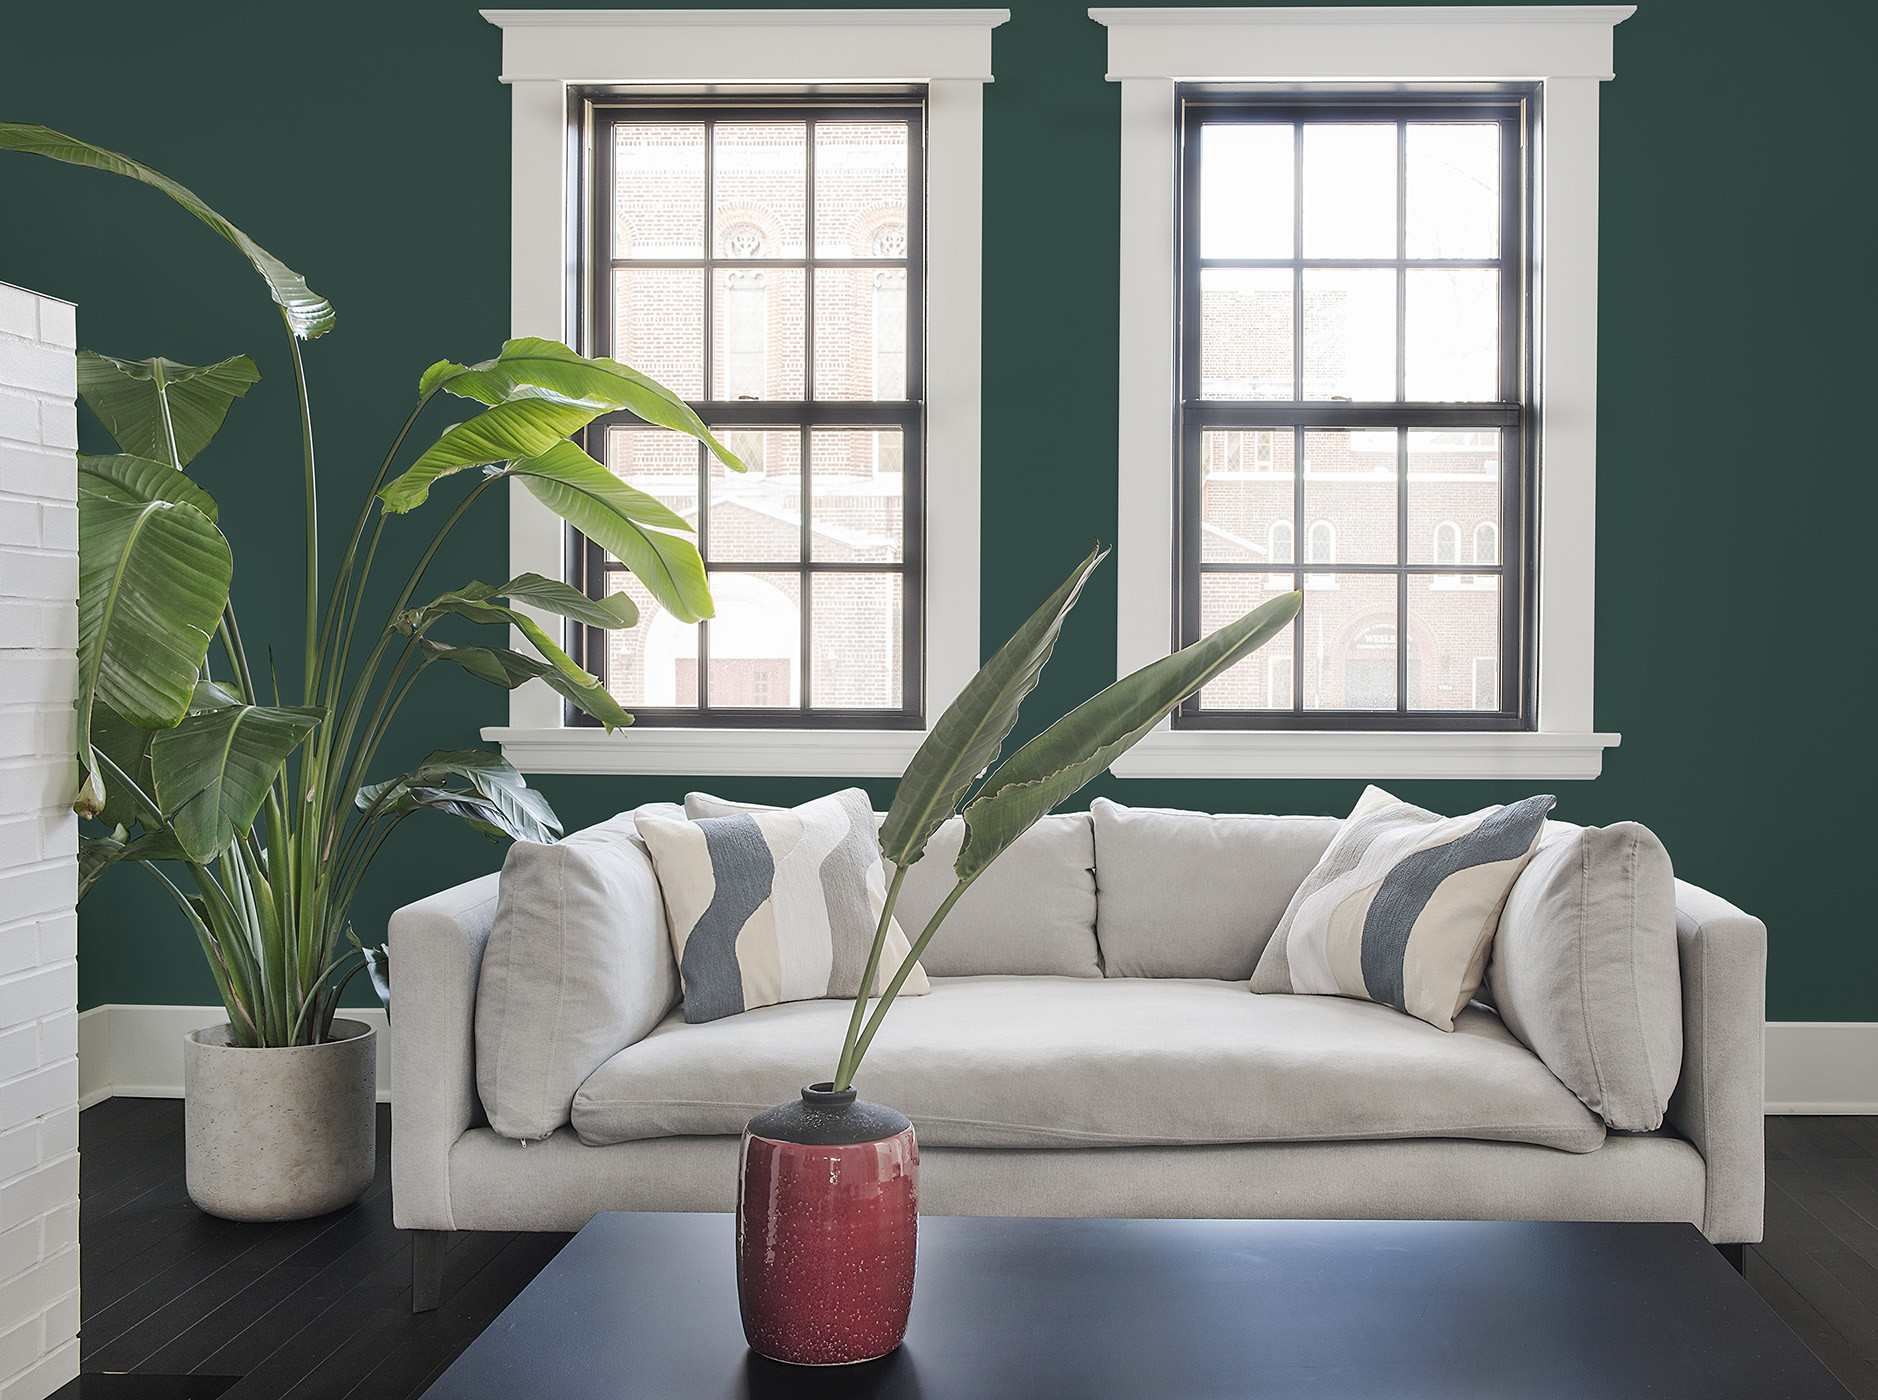 Green Walls with White Couch